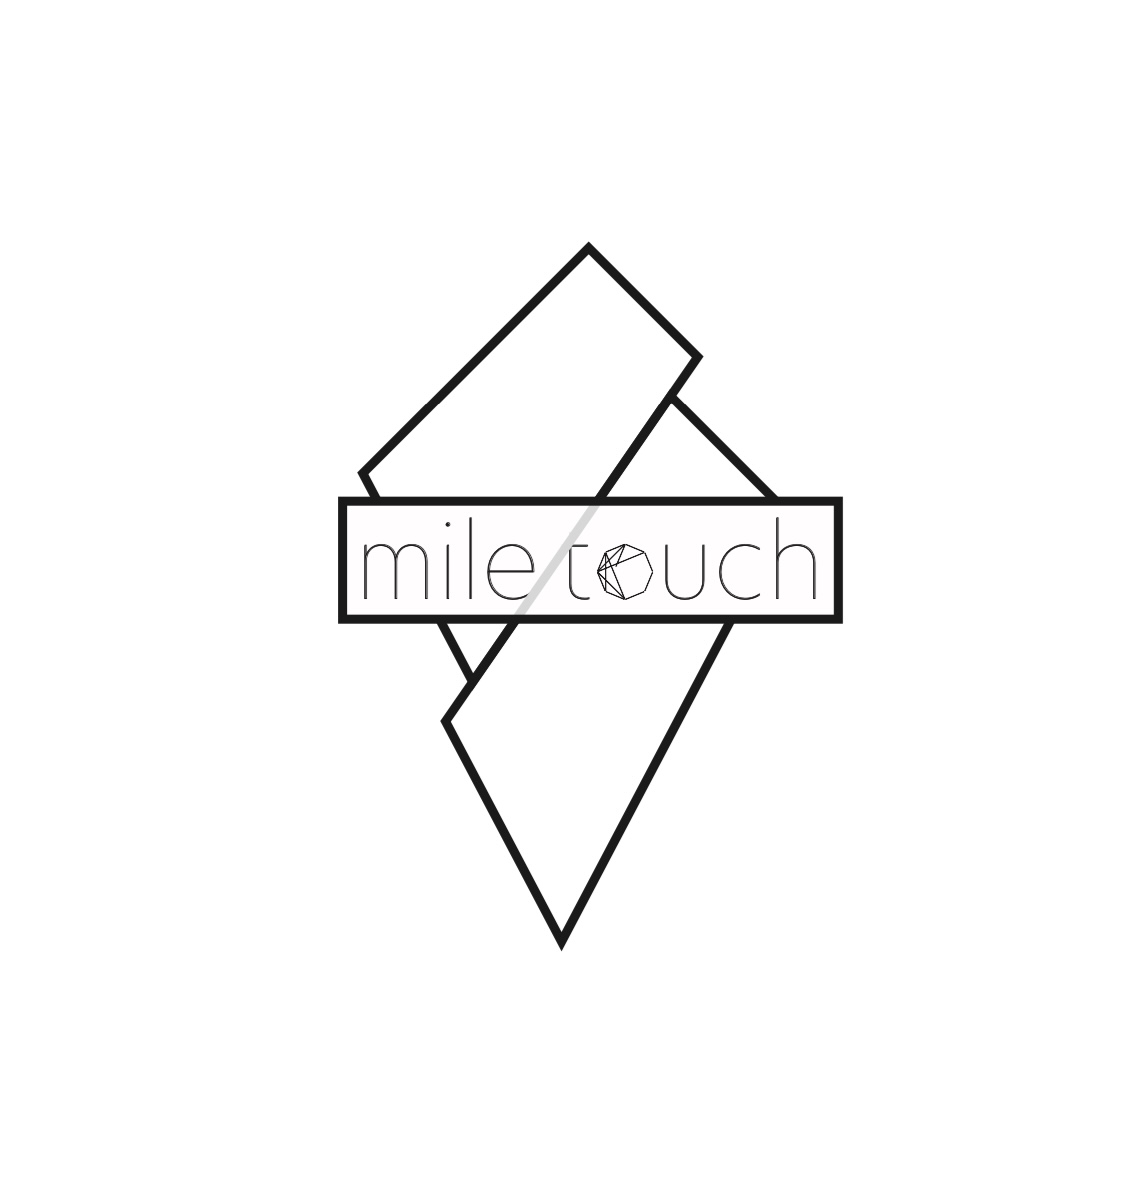 ▪️mile/ touchとは▪️